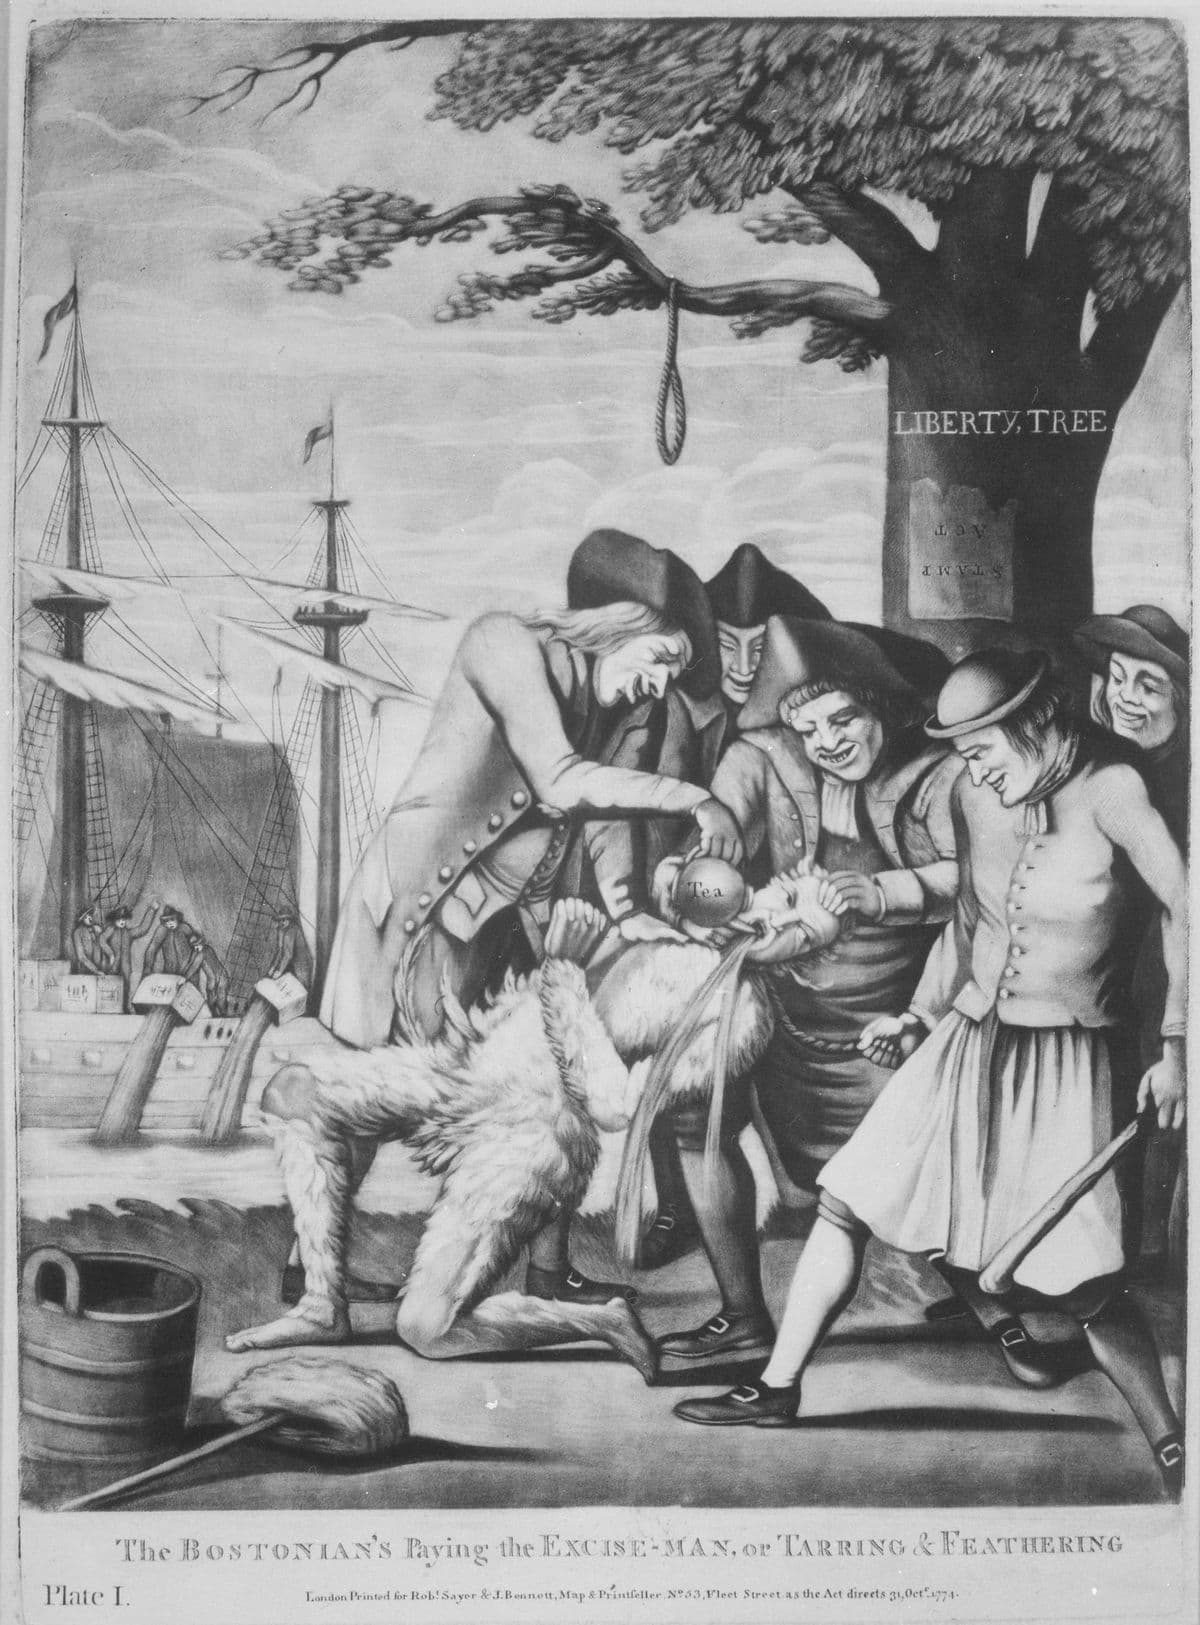 tep
000
Tea
LIBERTY, TREE
LOV
INVI
D
The BOSTONIAN'S Paying the EXCISE-MAN, or TARRING & FEATHERING
Plate I.
London Printed for Rob! Sayer & J.Bennett, Map & Printfeller N°53,Fleet Street as the Act directs 31,Oct 1774.